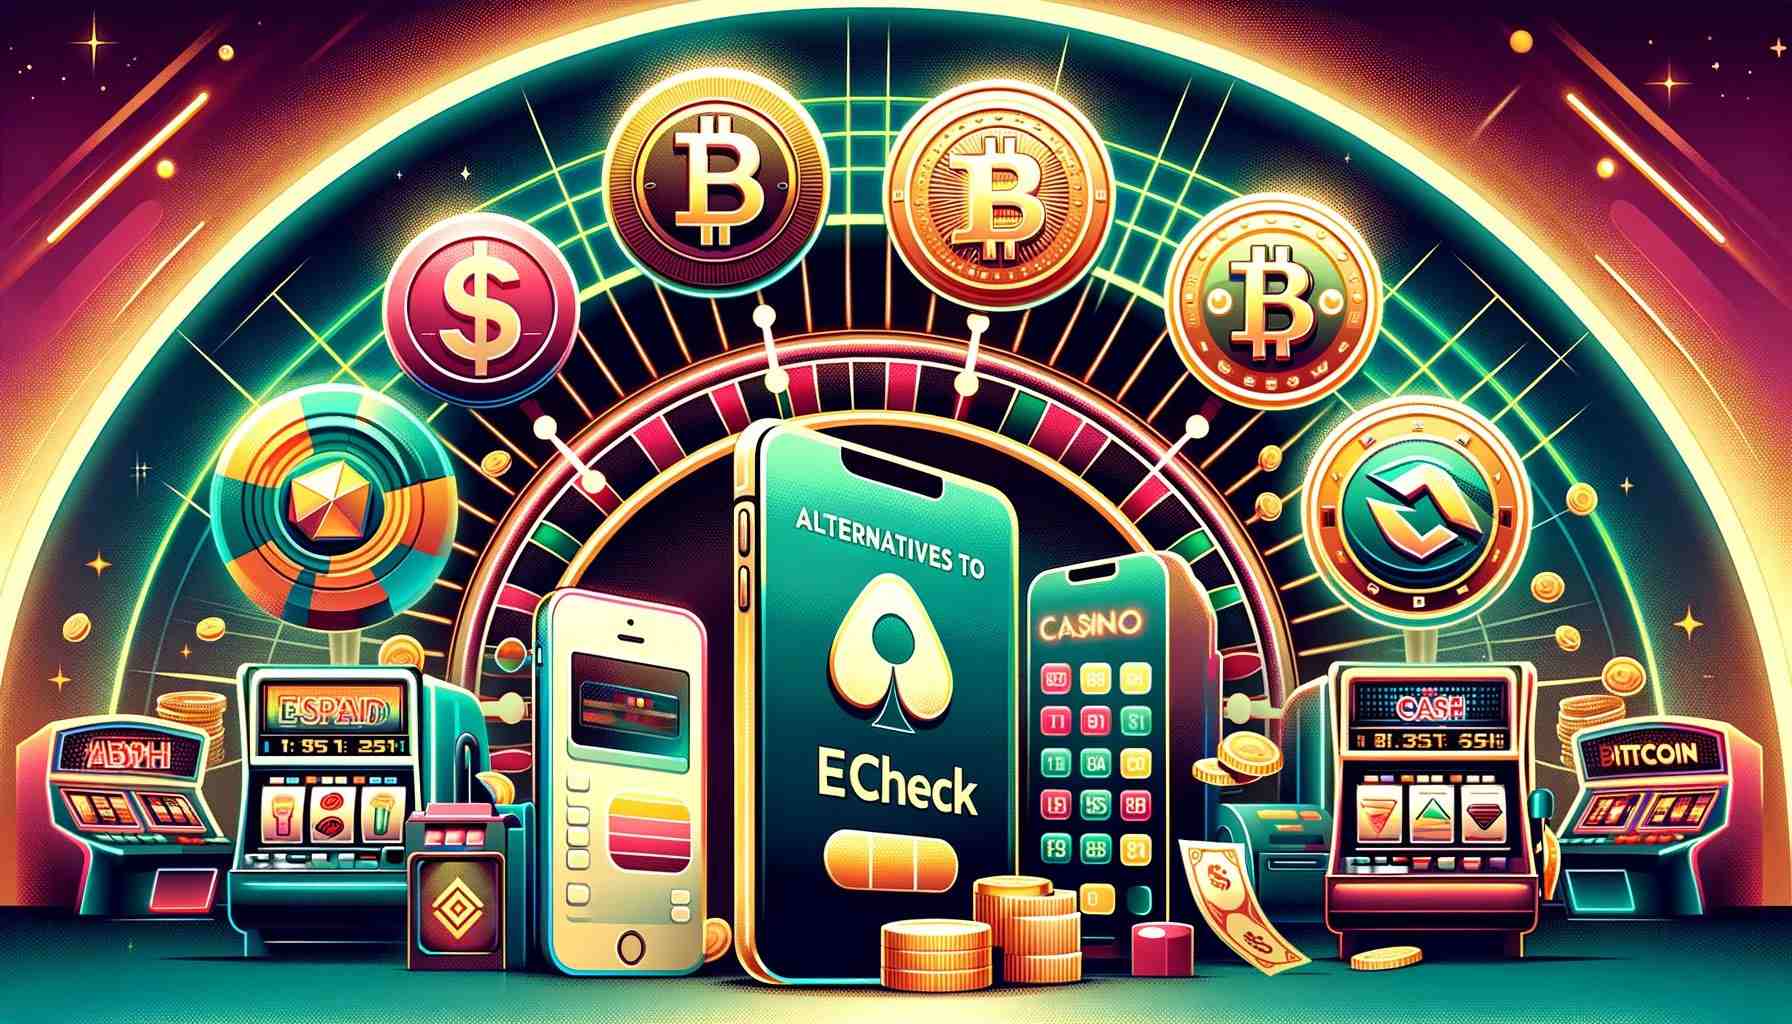 Alternatives to eCheck casino payments